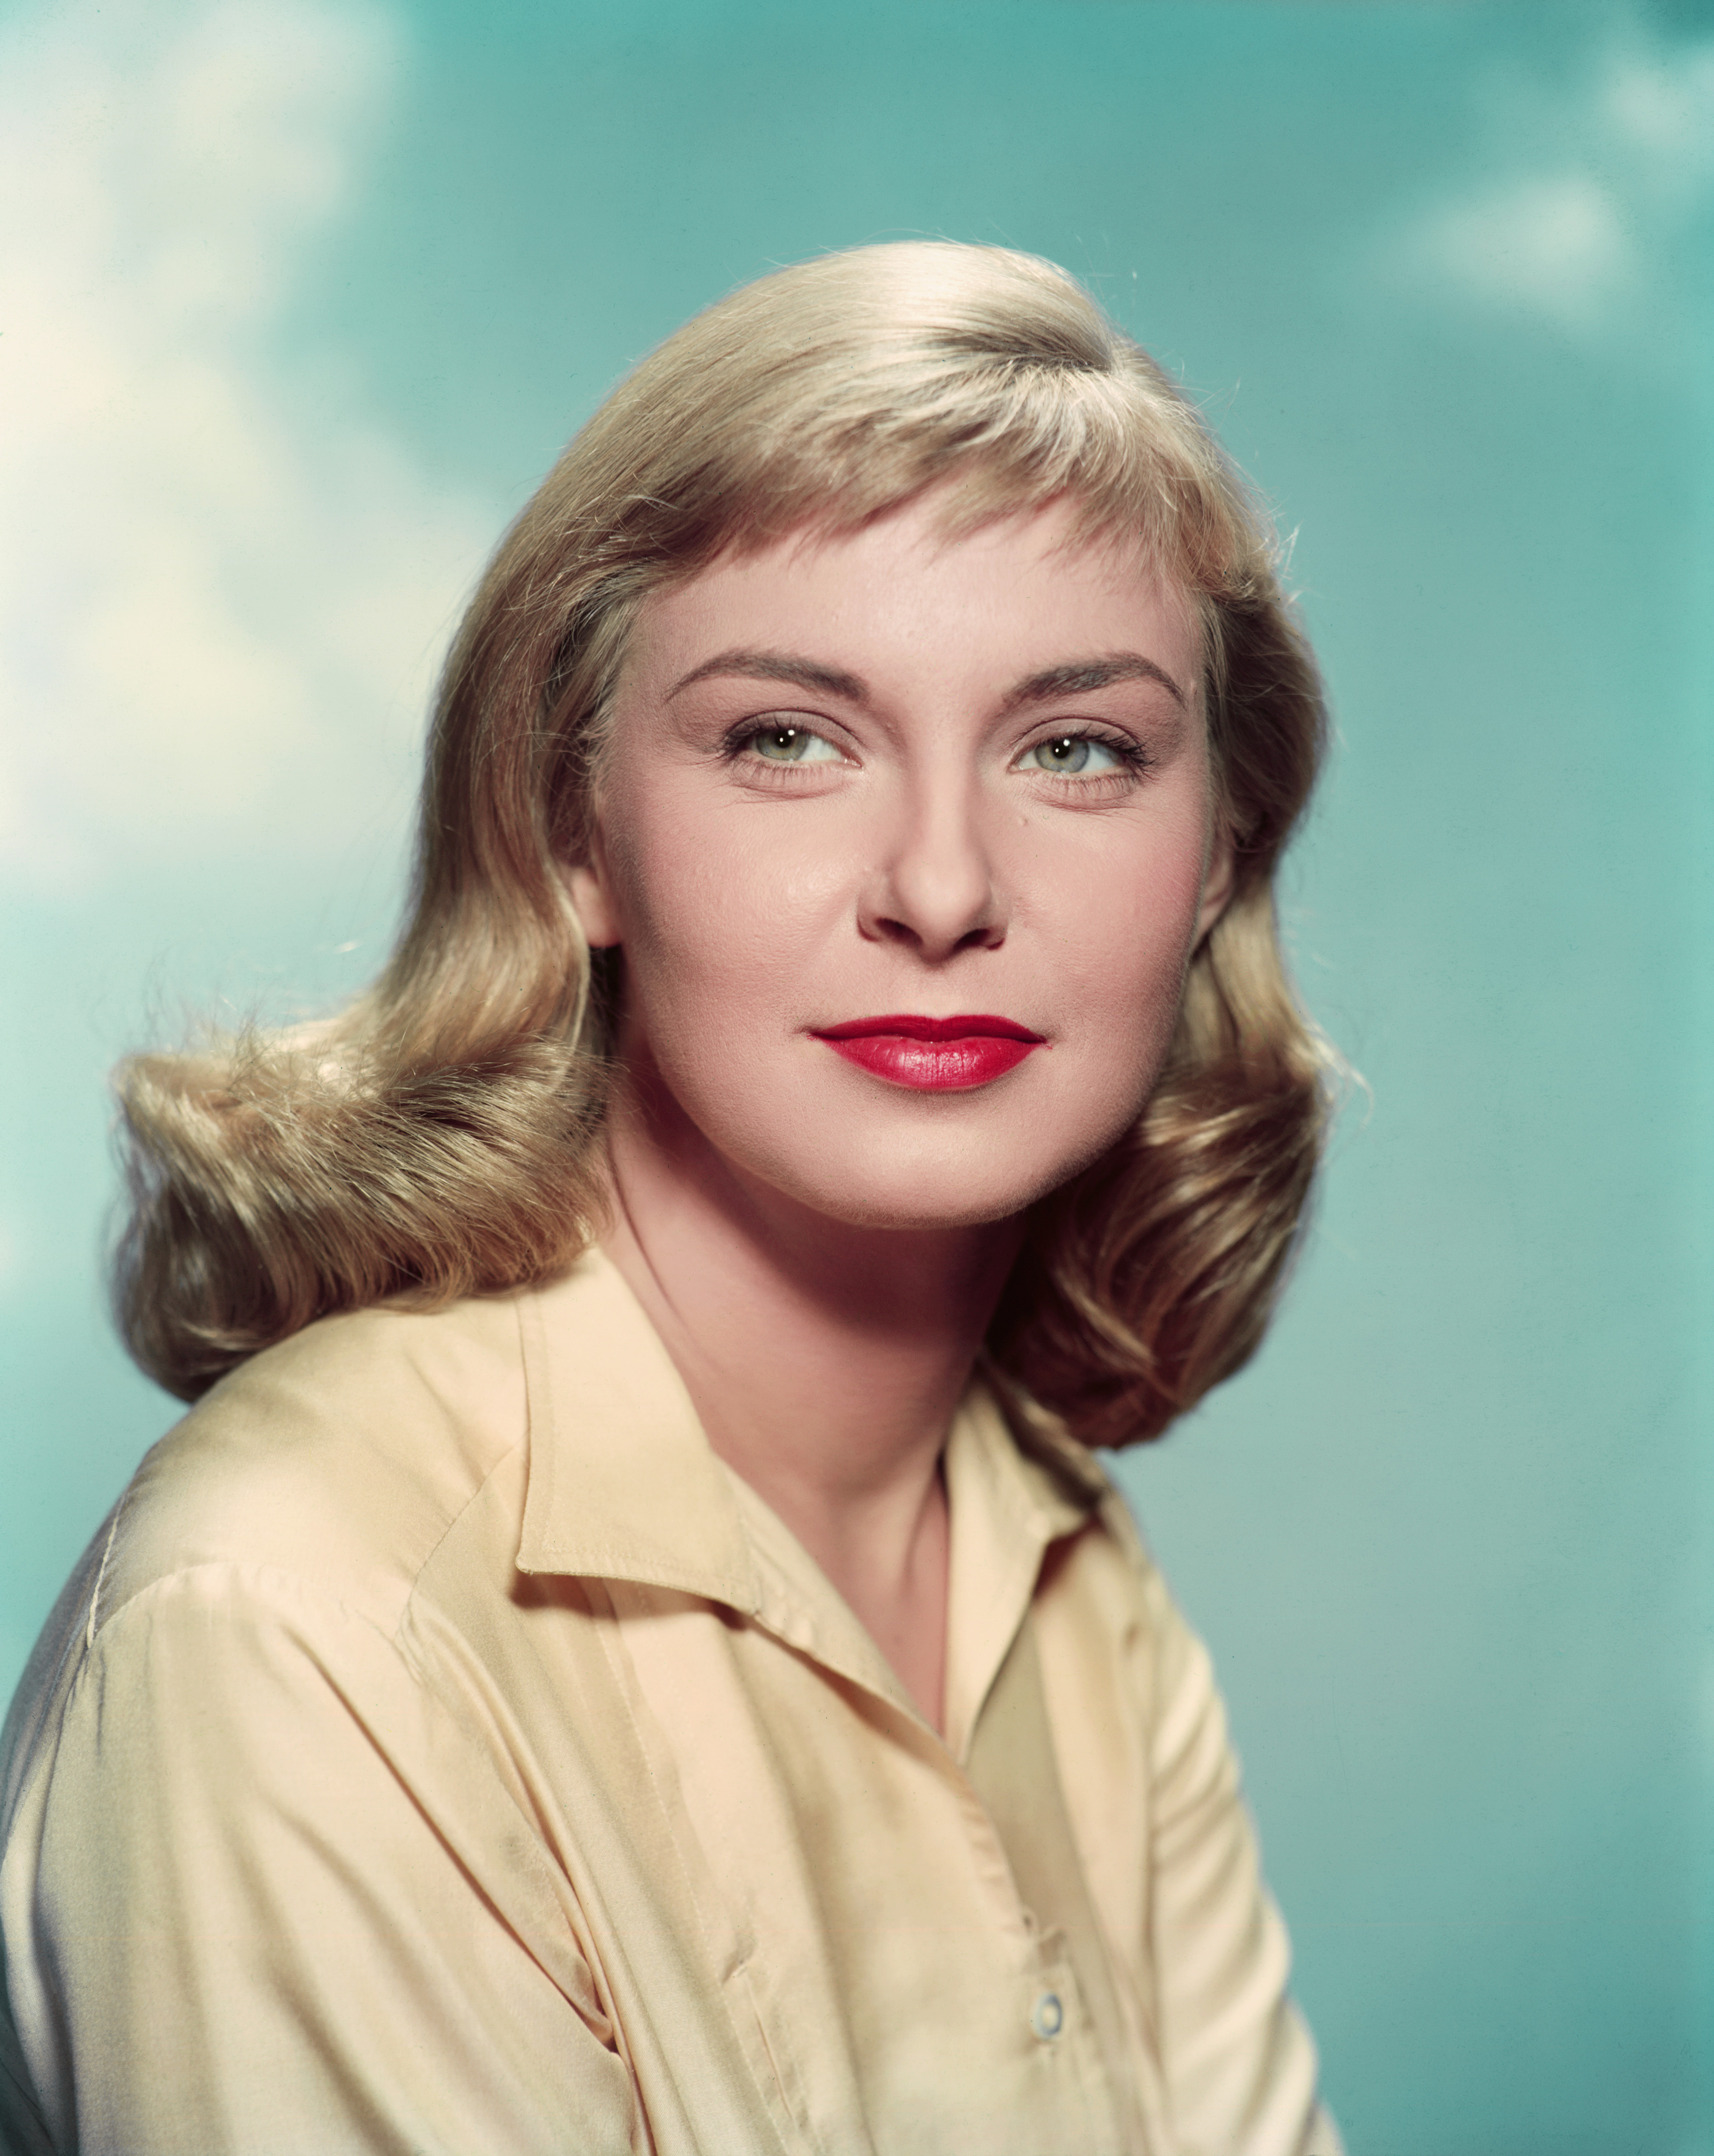 L'actrice américaine Joanne Woodward, vers 1955 | Source : Getty Images